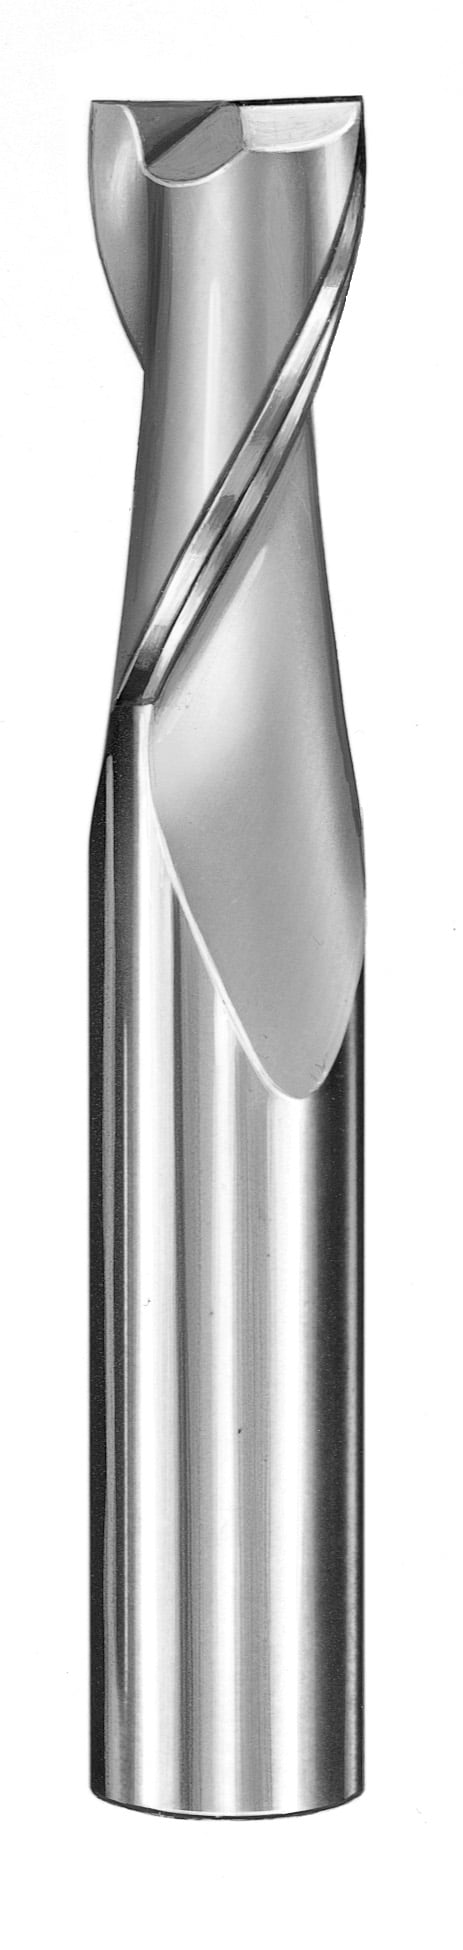 1/8" Dia, 2 Flute, Square End End Mill - 30315